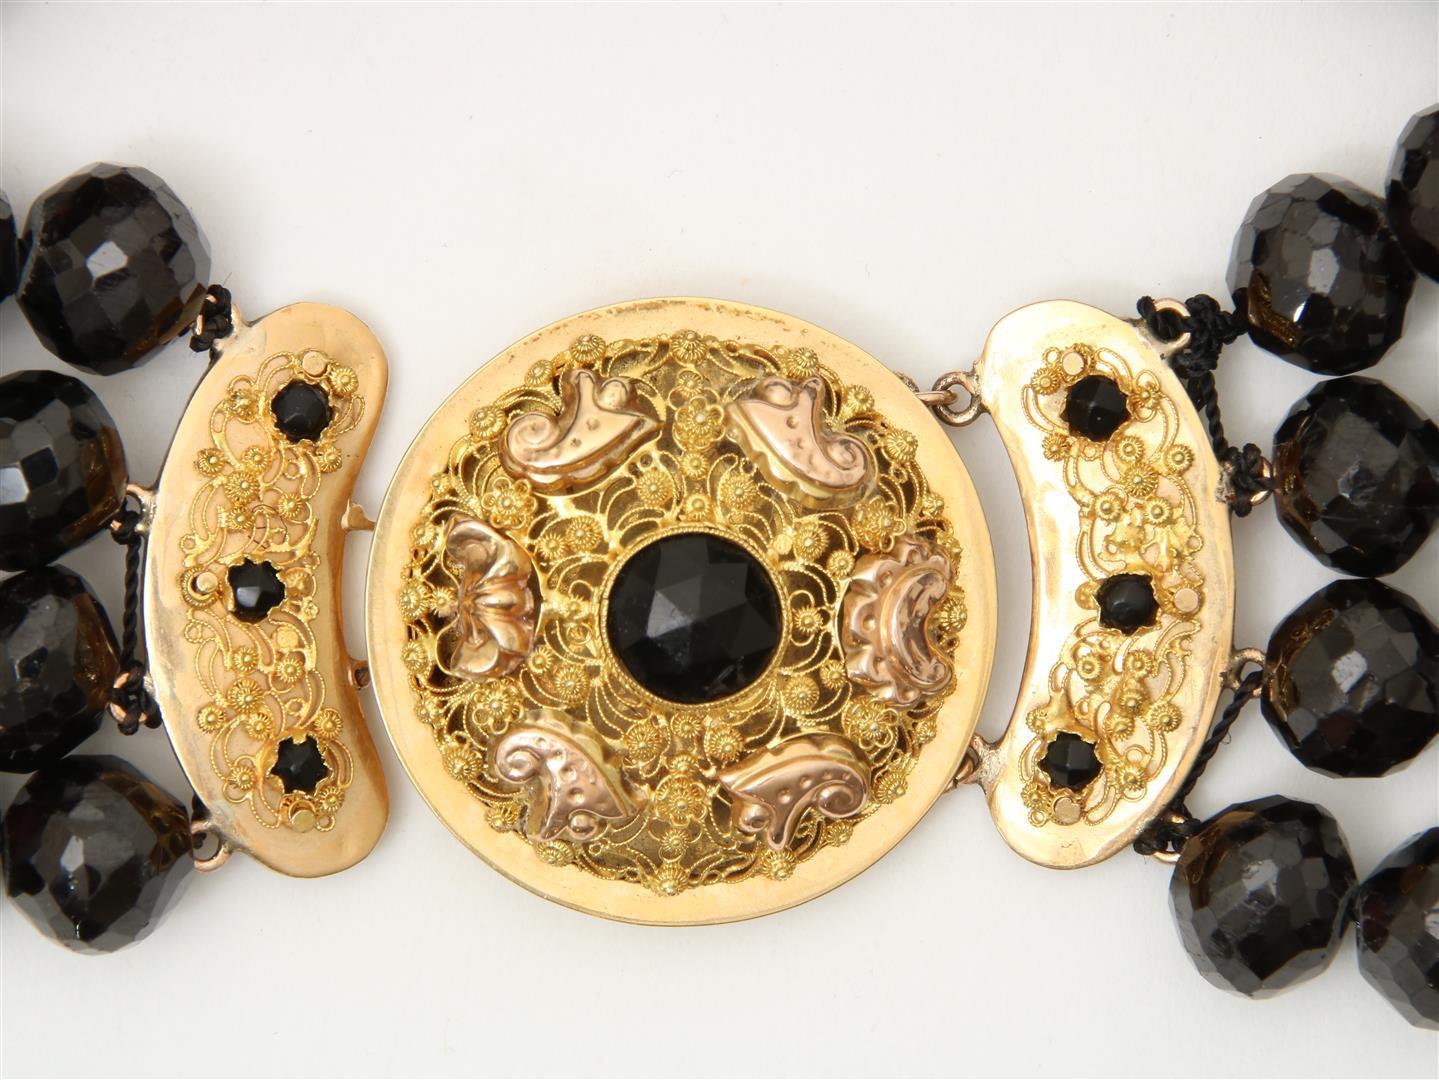 4-row jet mourning necklace on a gold filigree decorated regional lock set with jet, Zeeland